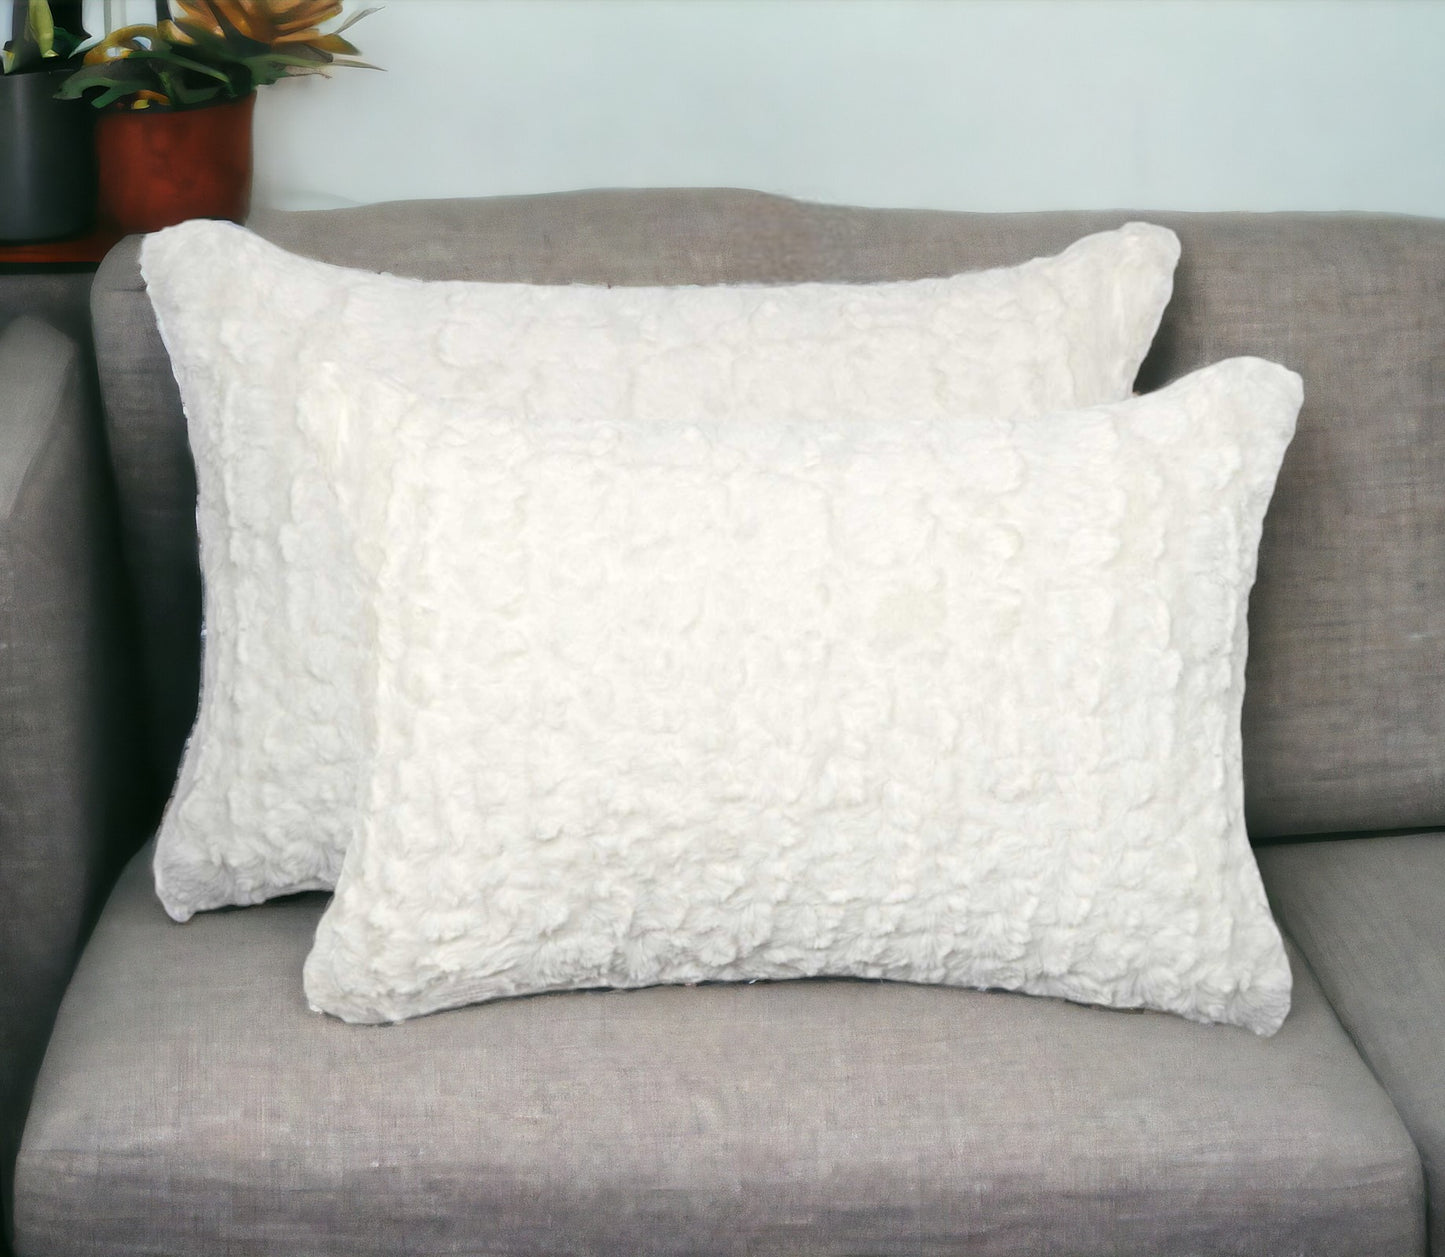 Set of Two 12" X 20" Ivory Faux Fur Throw Pillow